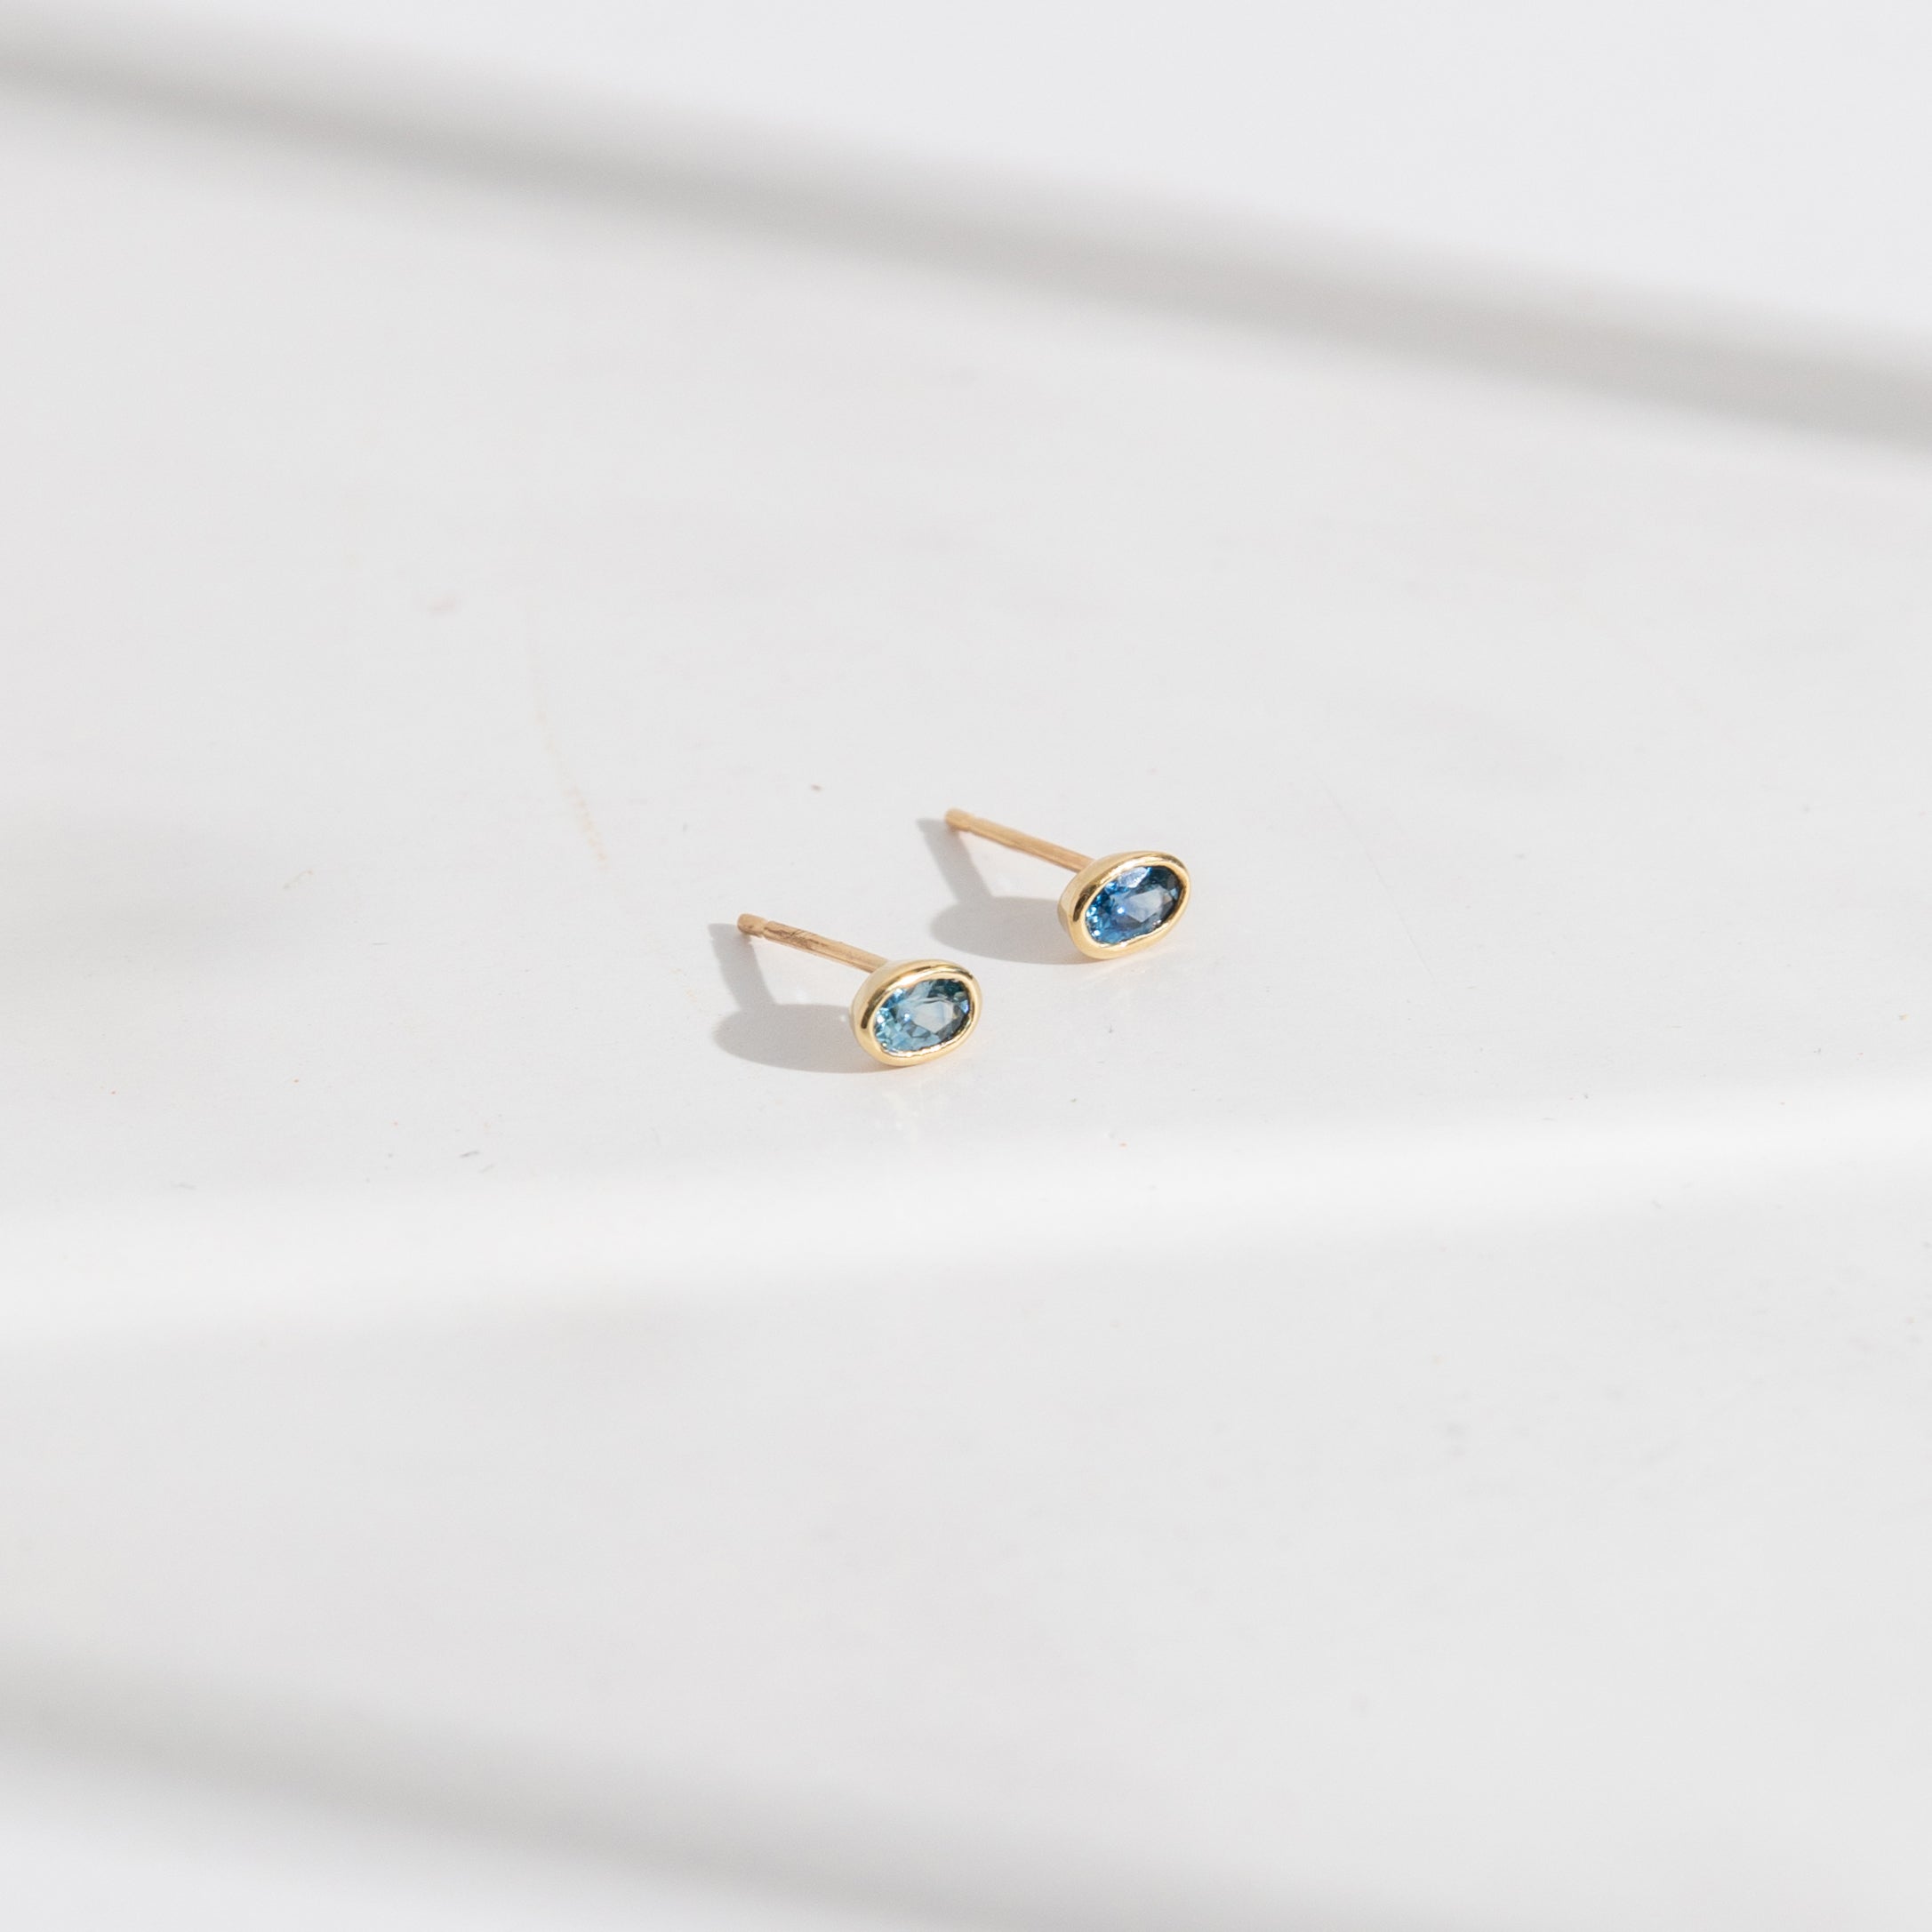 Ana Delicate Earrings 14k Yellow Gold Set With Blue Sapphires By SHW Fine Jewelry NYC